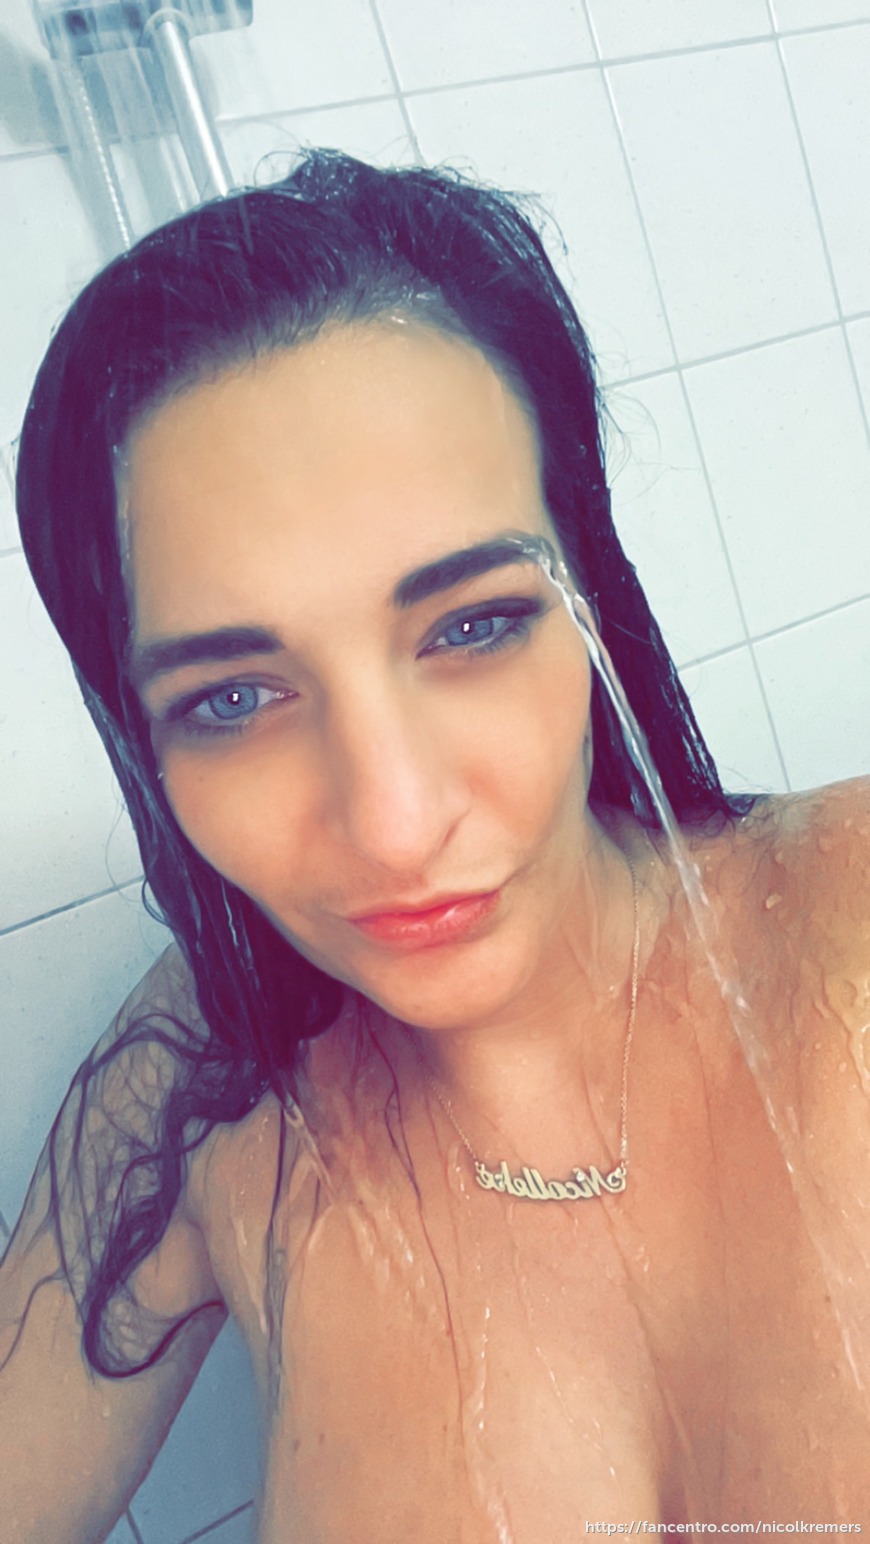 Who wants to see some more shower content? 🙈🙈🙈💦 - Nicol Kremers -  Fancentro